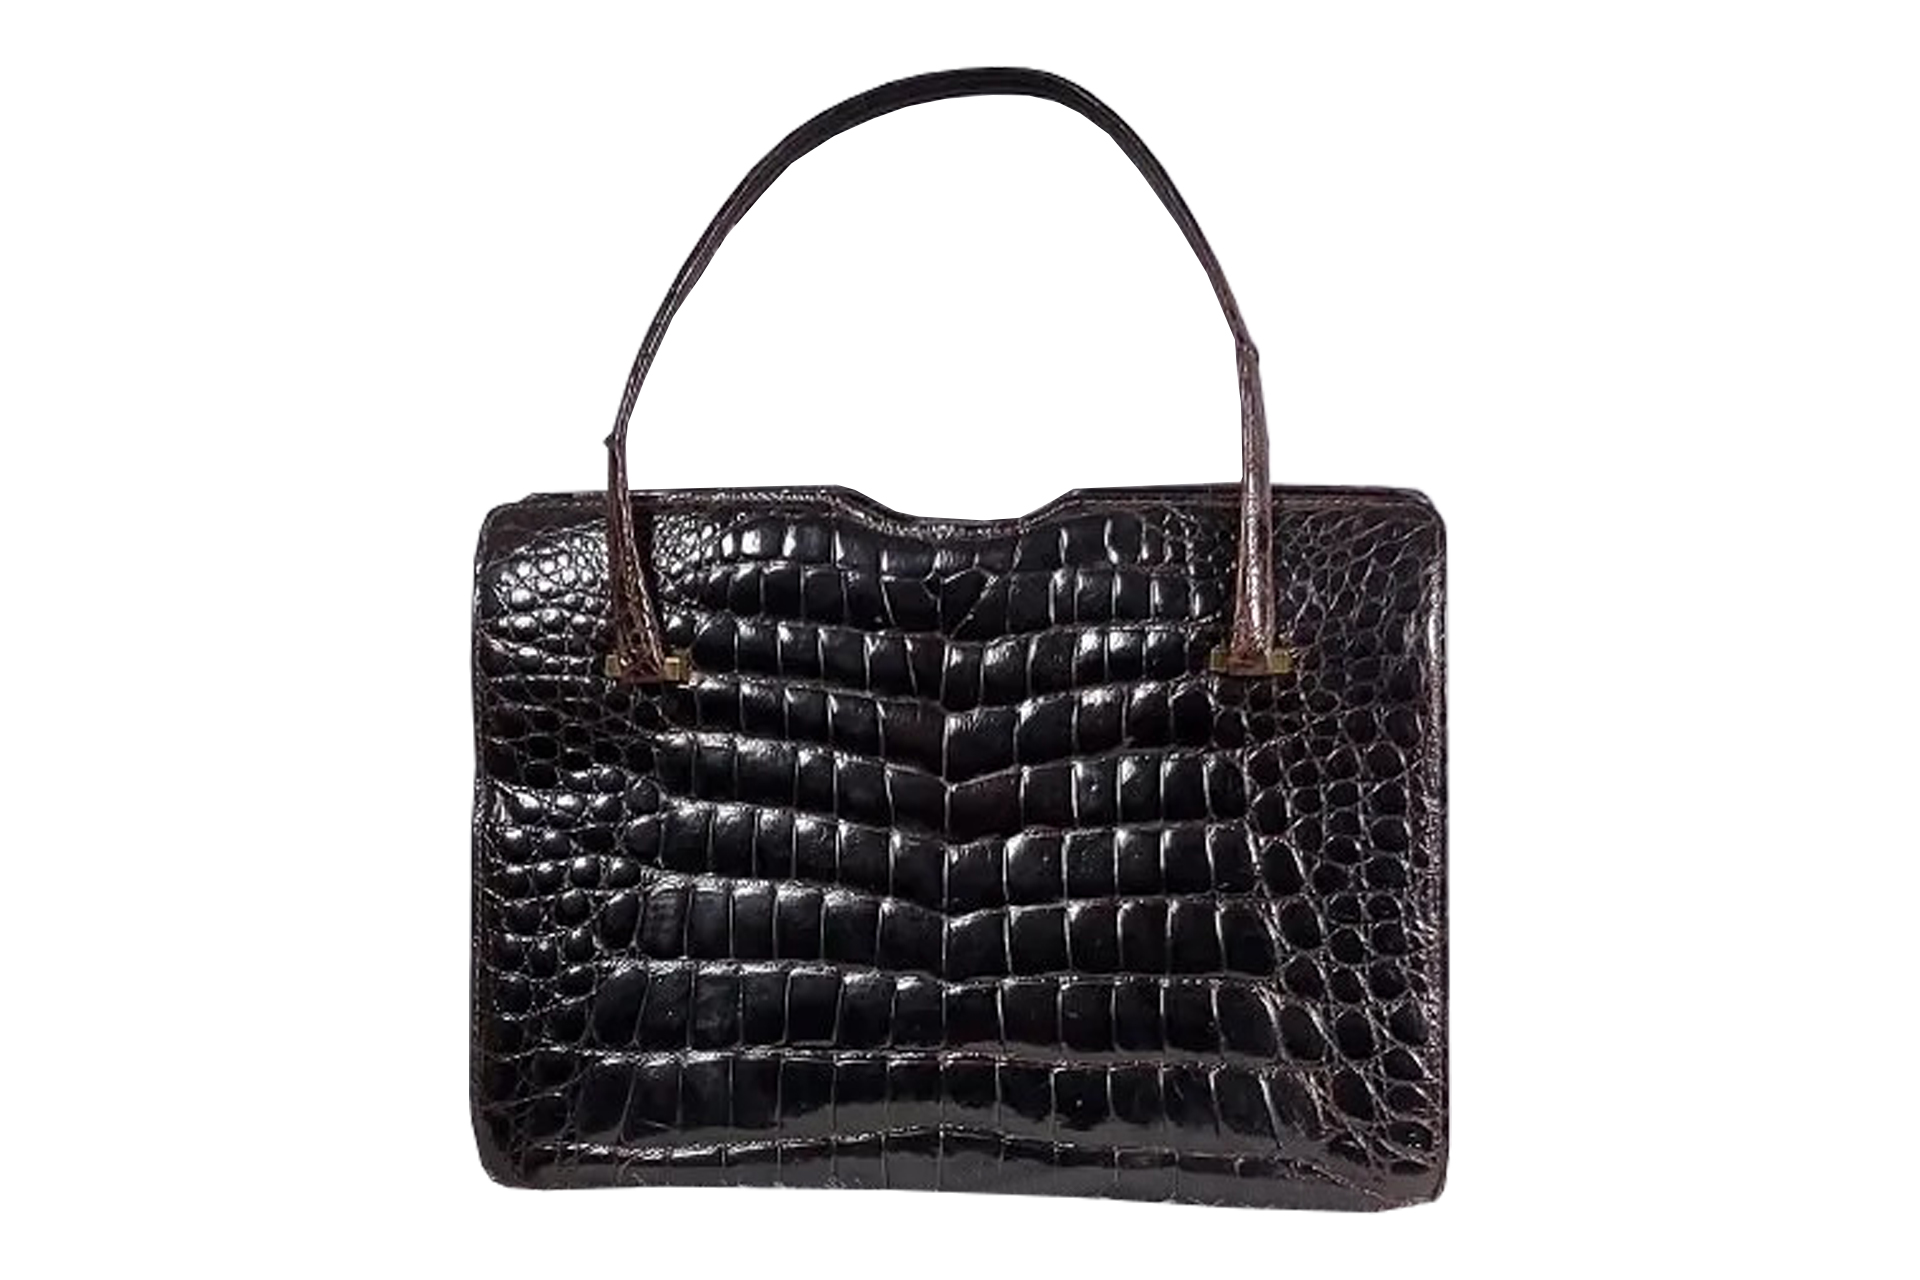 Jasper52 to auction European furs and reptile bags, March 17